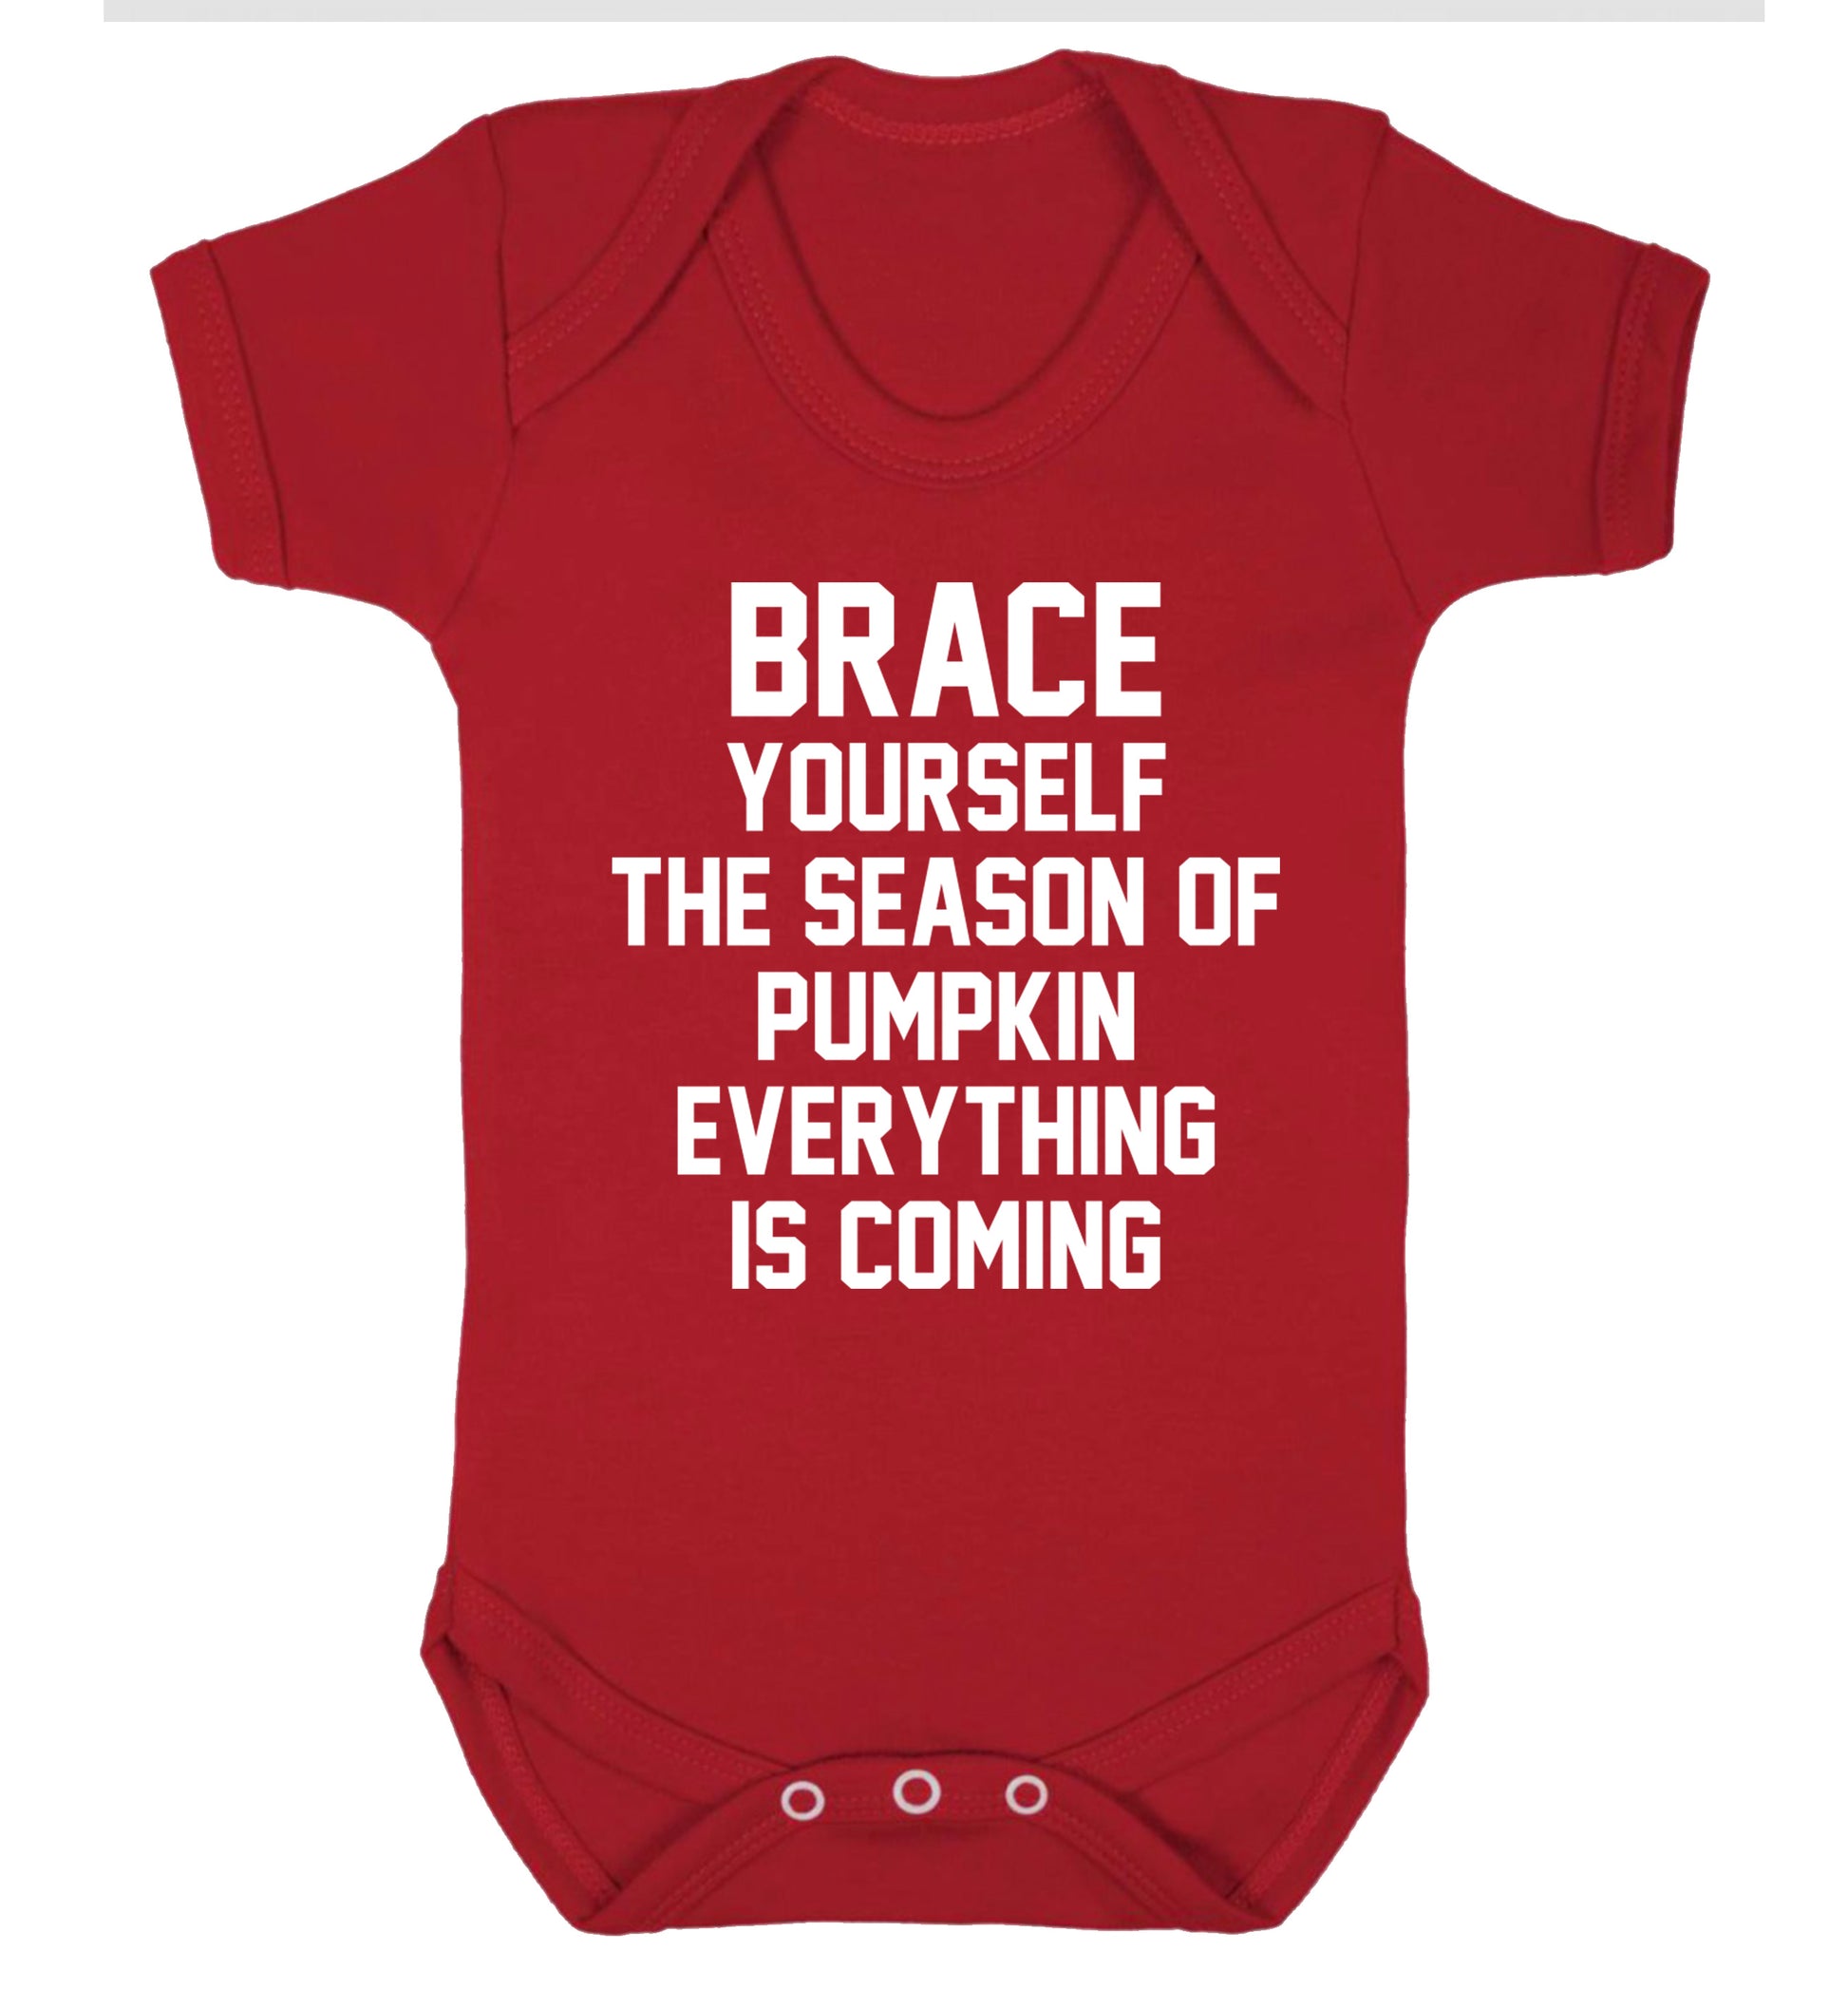 Brace yourself the season of pumpkin everything is coming Baby Vest red 18-24 months